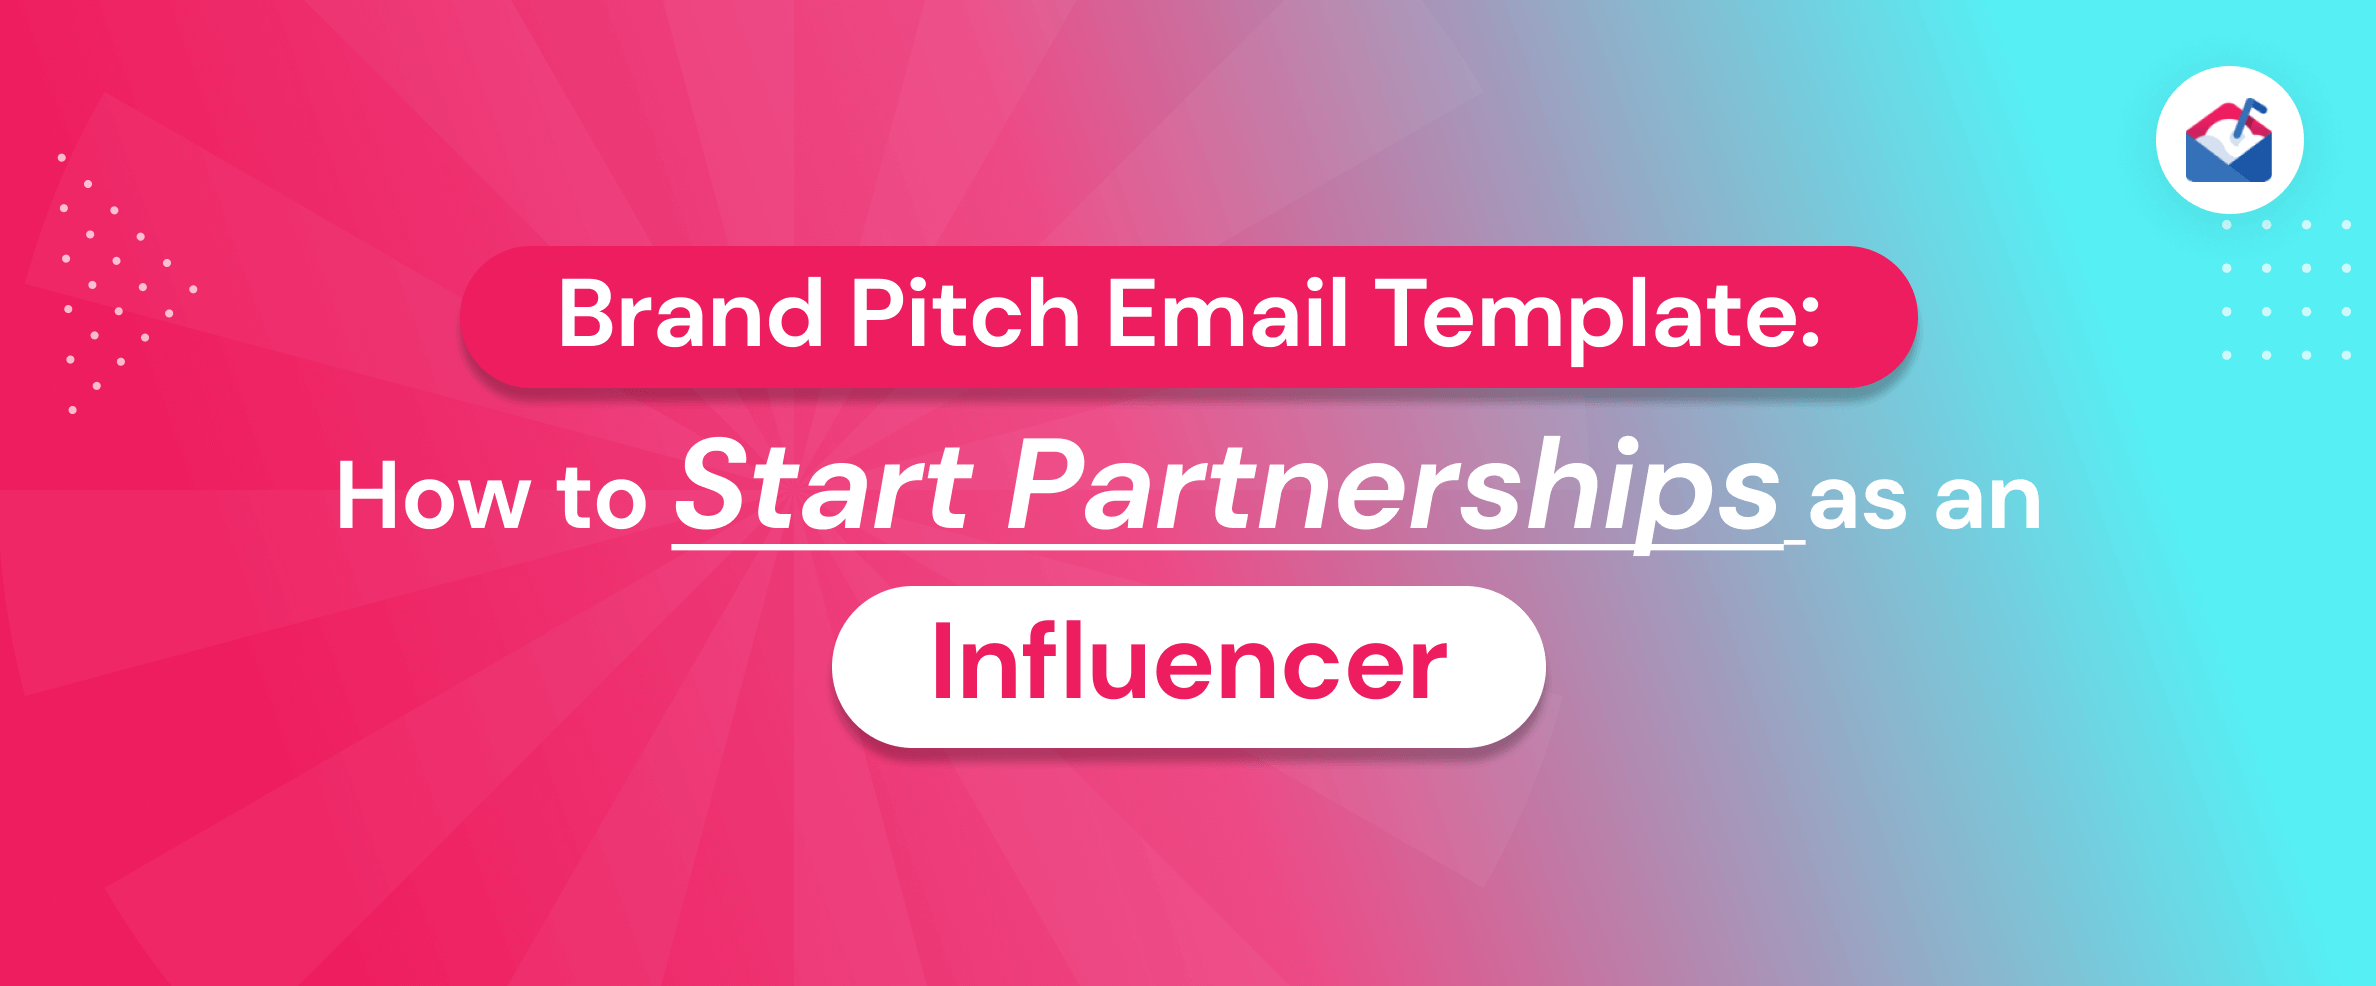 Brand Pitch Email Template